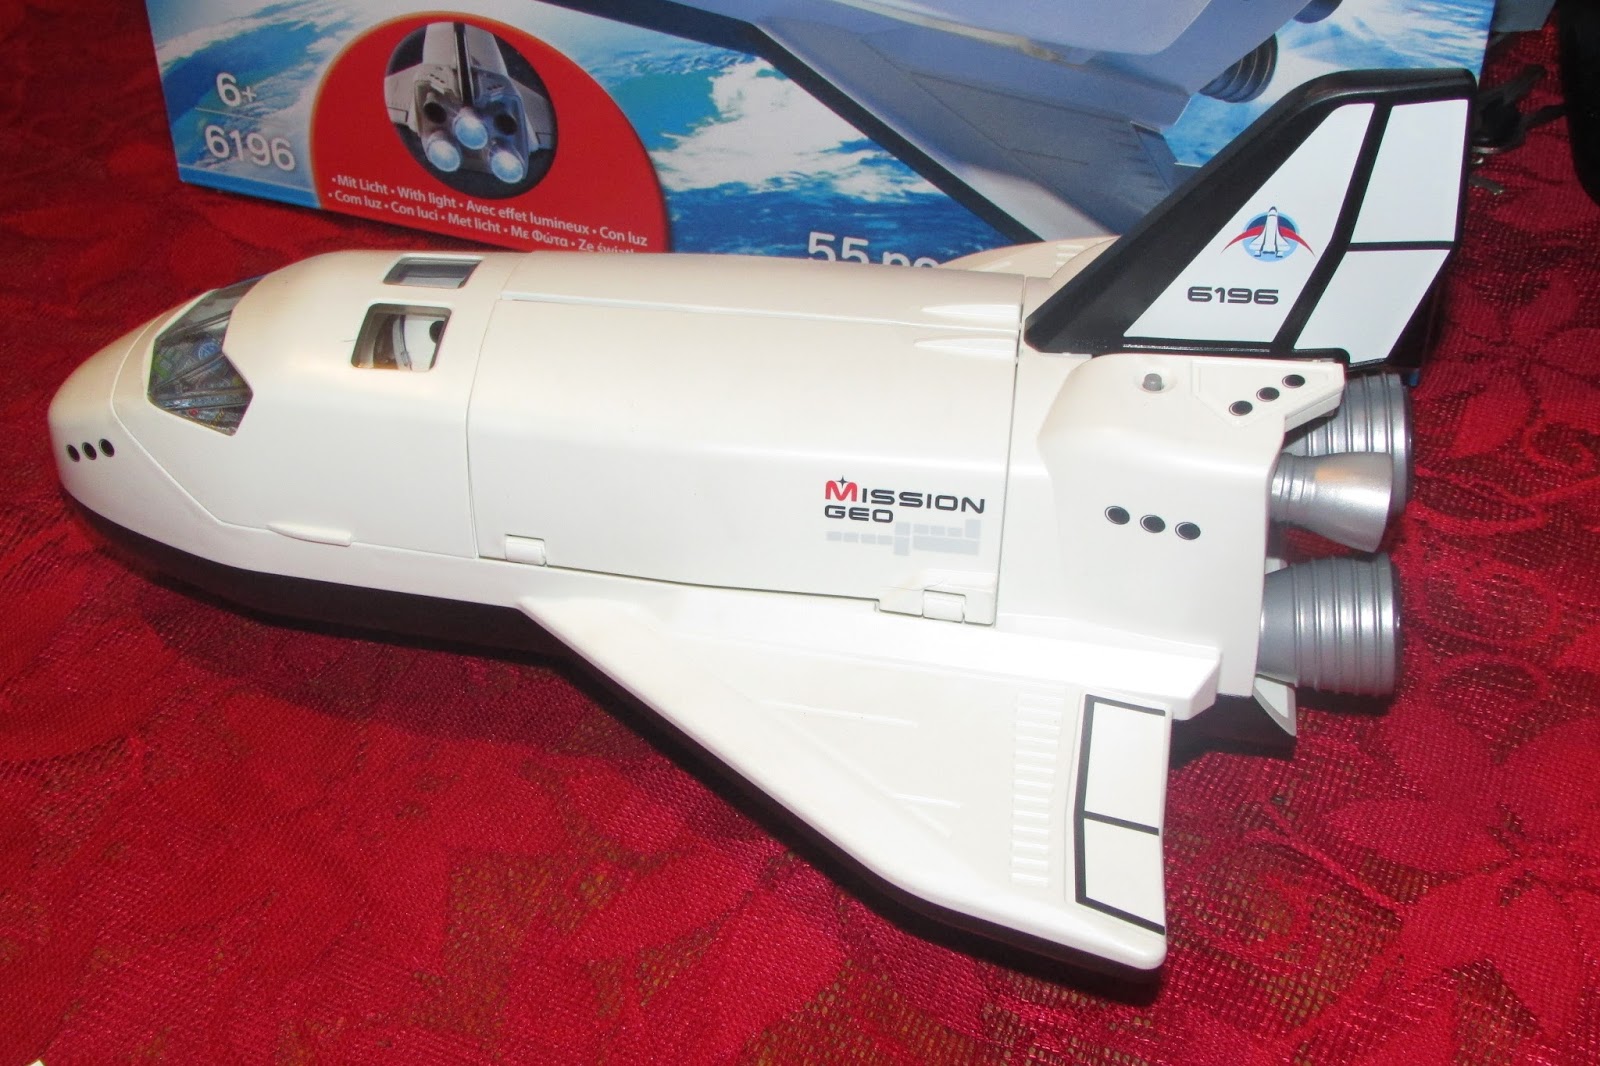 playmobil space shuttle instructions